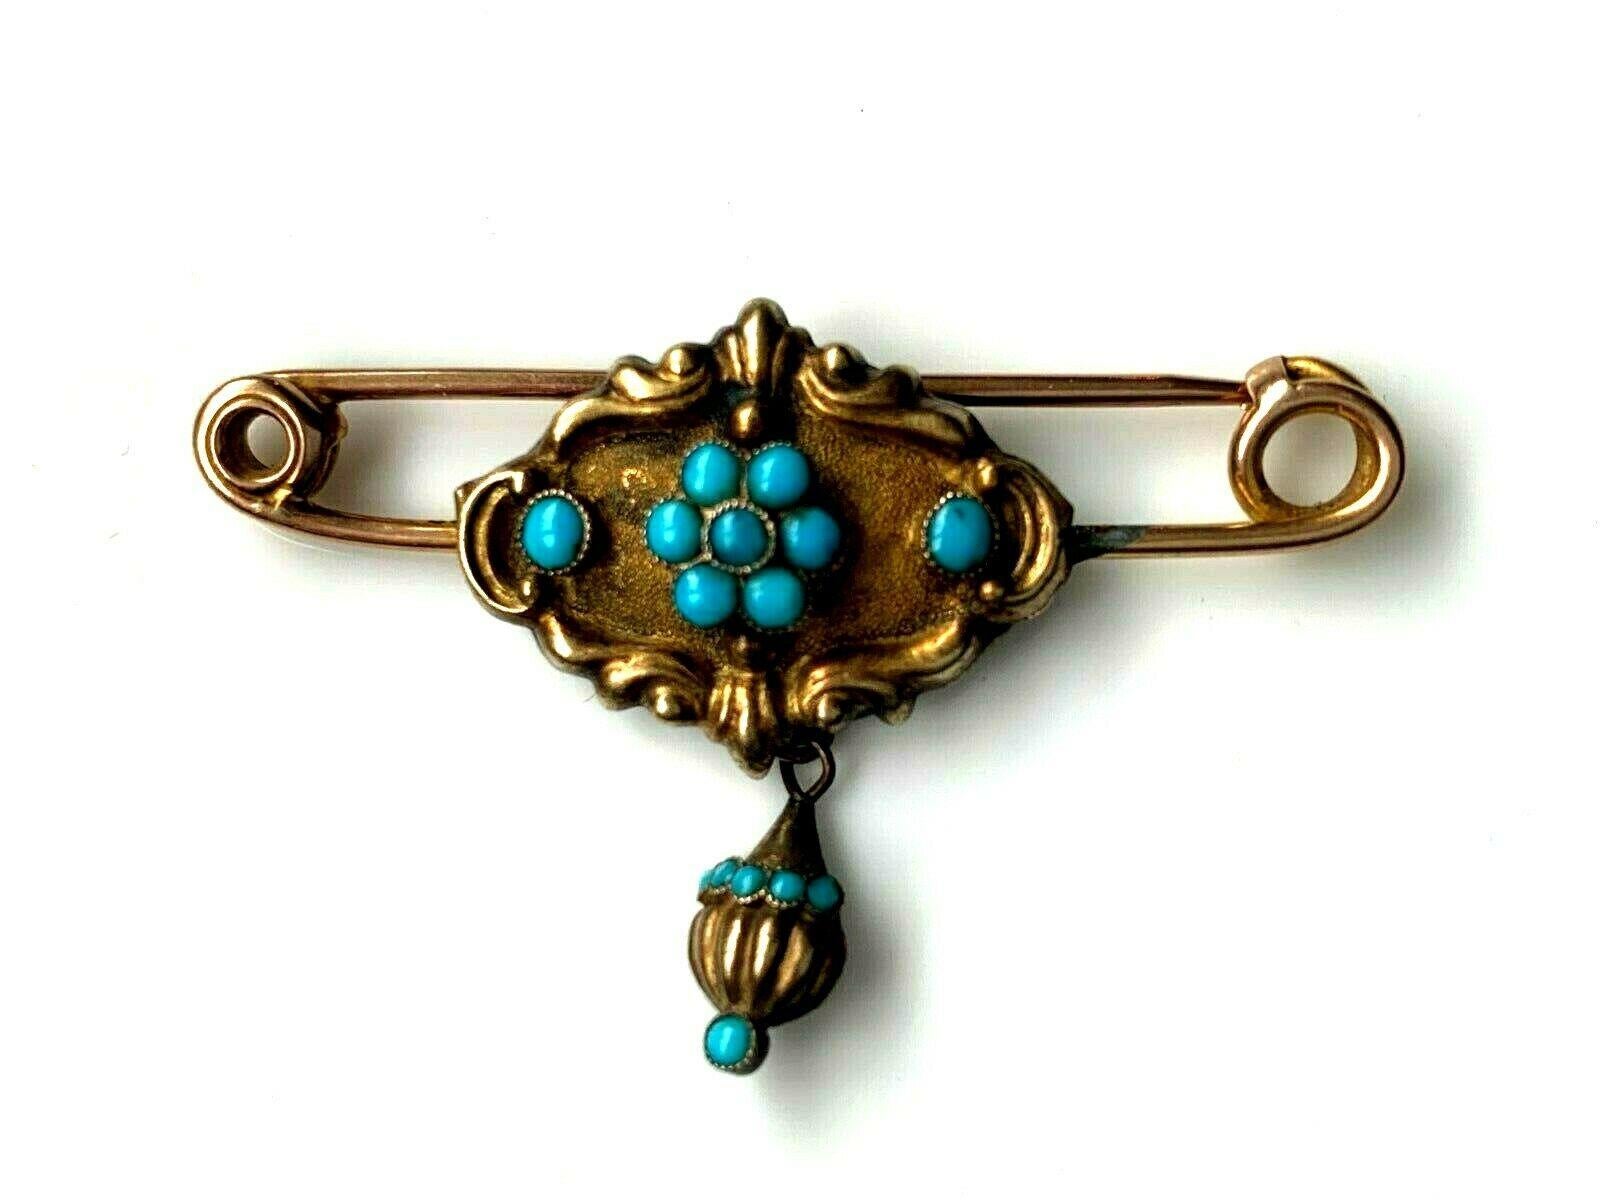 9ct 375 Gold Antique Georgian Brooch with 
beautiful Turquoise stones
Beautifully decorative floral design
Actual Size 4.5cm x 2cm
Weight 3.28 grammes
Fully Hallmarked in two places.
Chester 1780 Makers R.P ? 